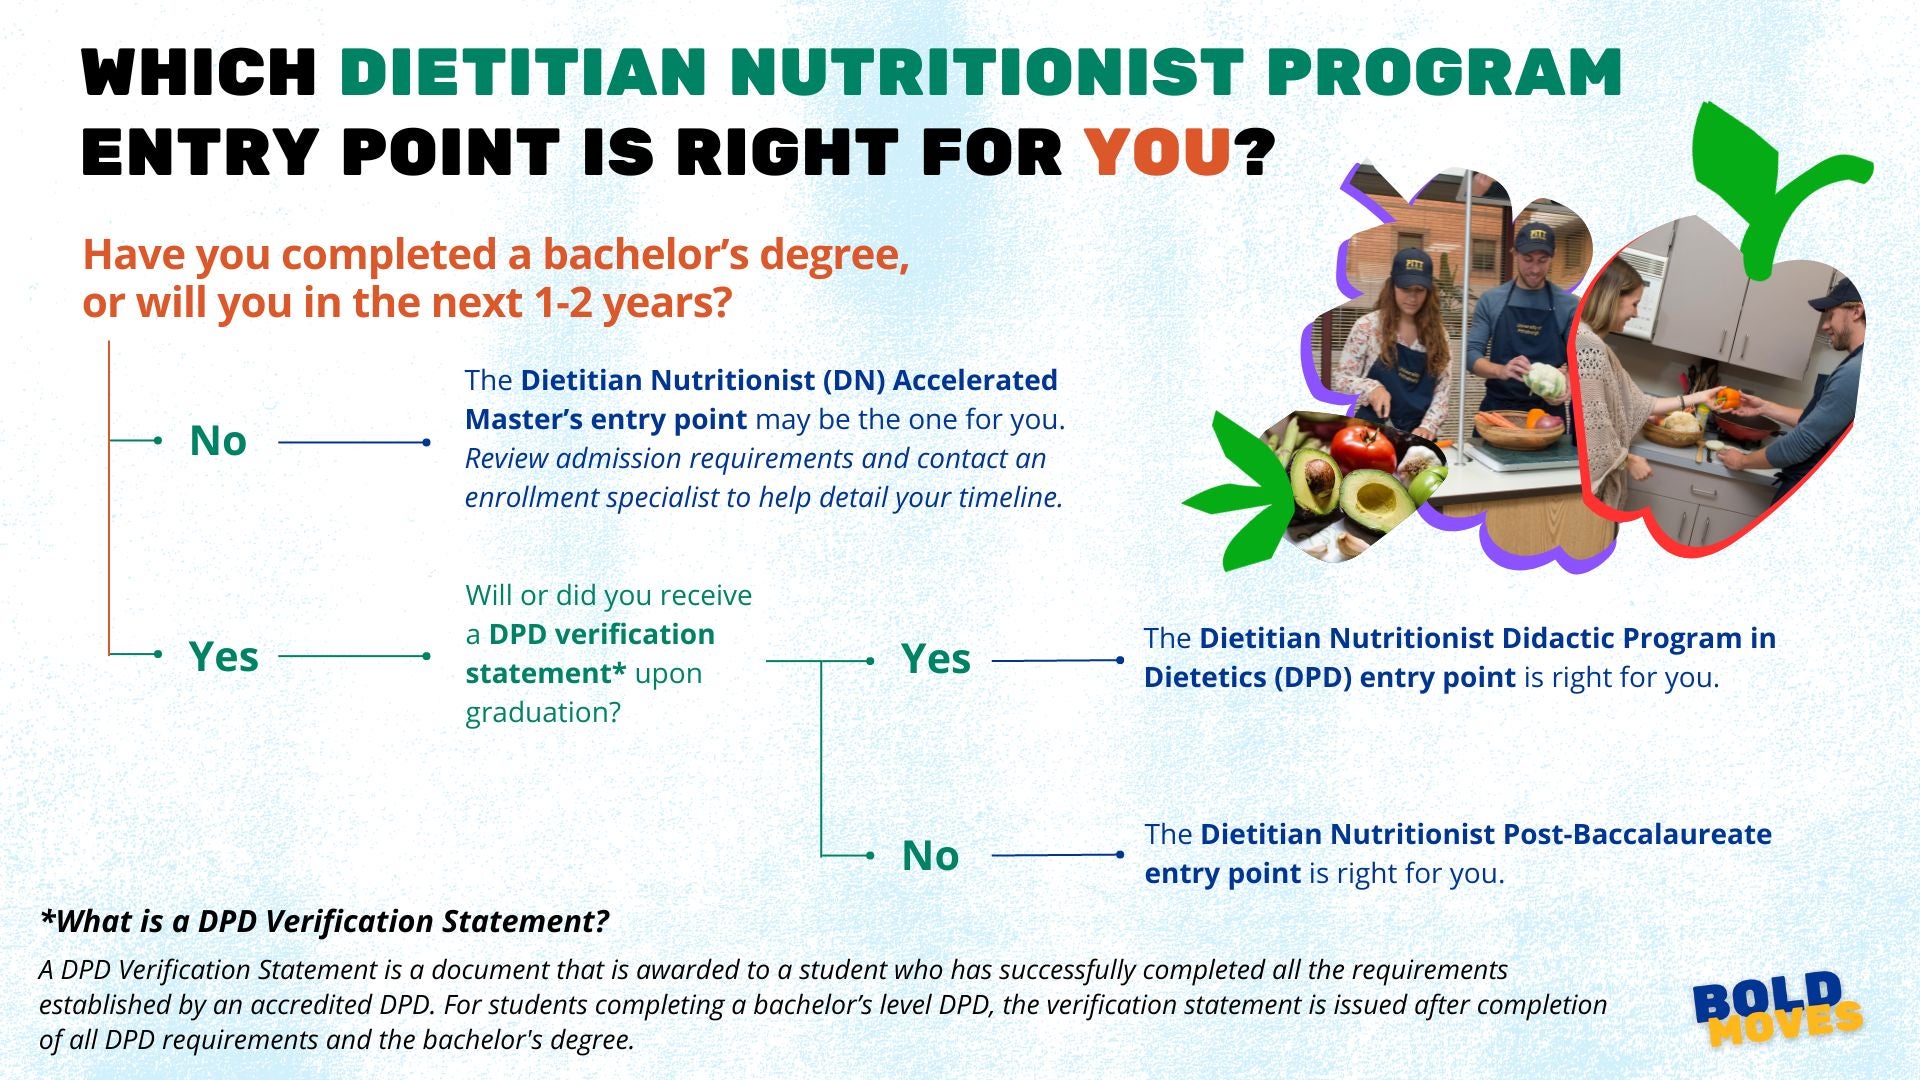 Which Dietician Nutritionist Entry Point is Right for You?